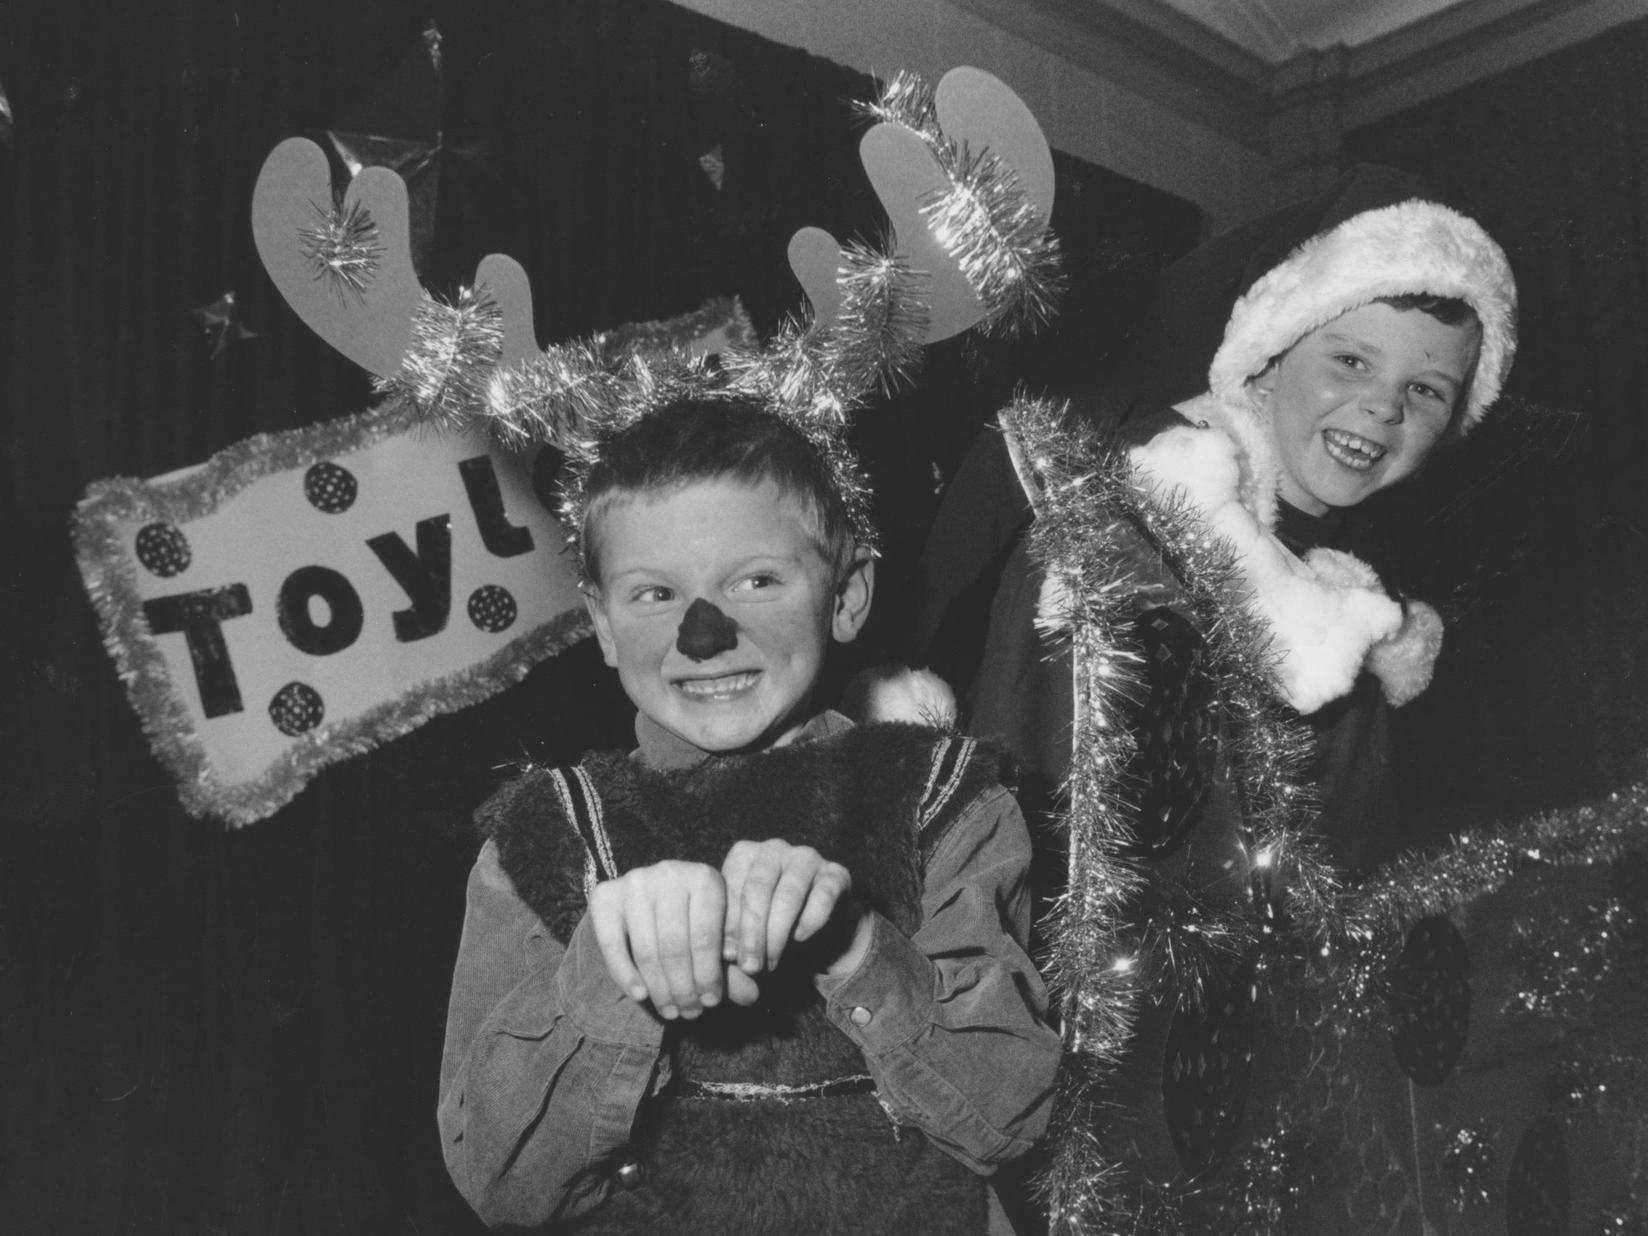 Pupils from Hinderwell School were about to put on their Christmas production in December 1997. Pictured is Santa played by Cameron Jamieson, having a sleigh ride with Rudolph, played by Carl Dickinson.